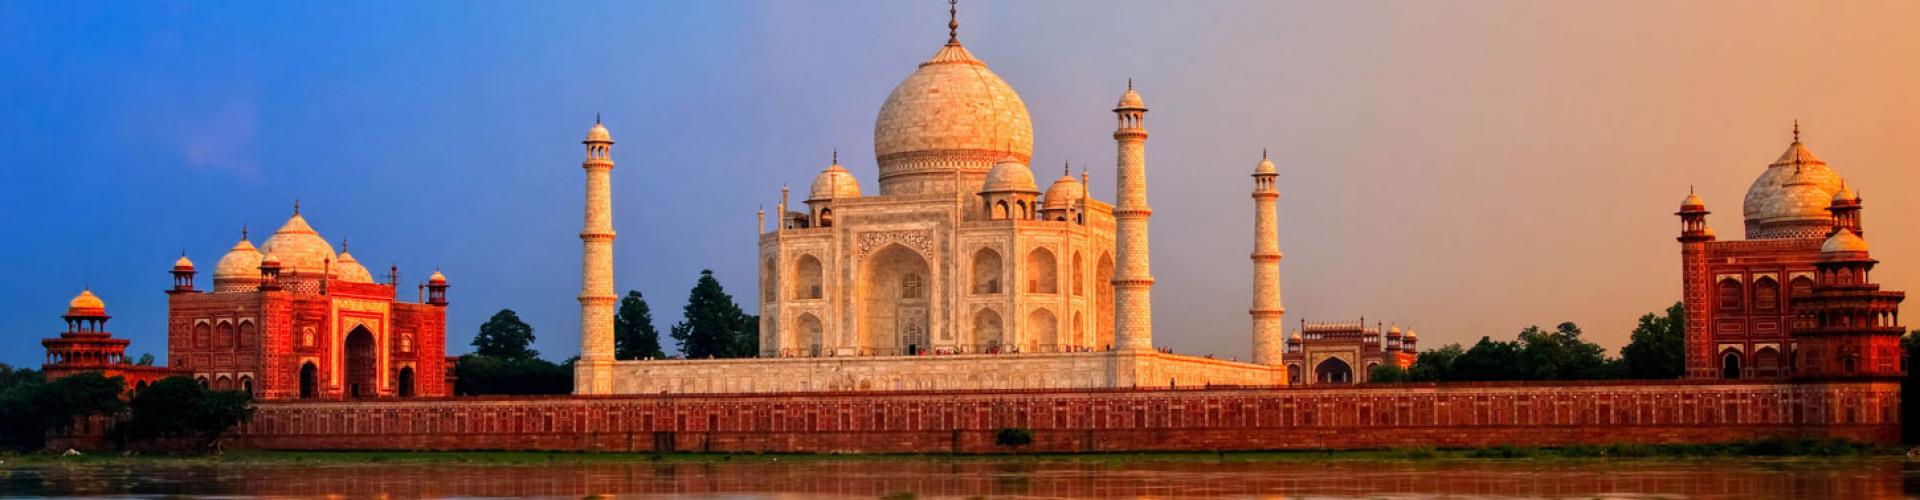 India tour packages from Edmonton